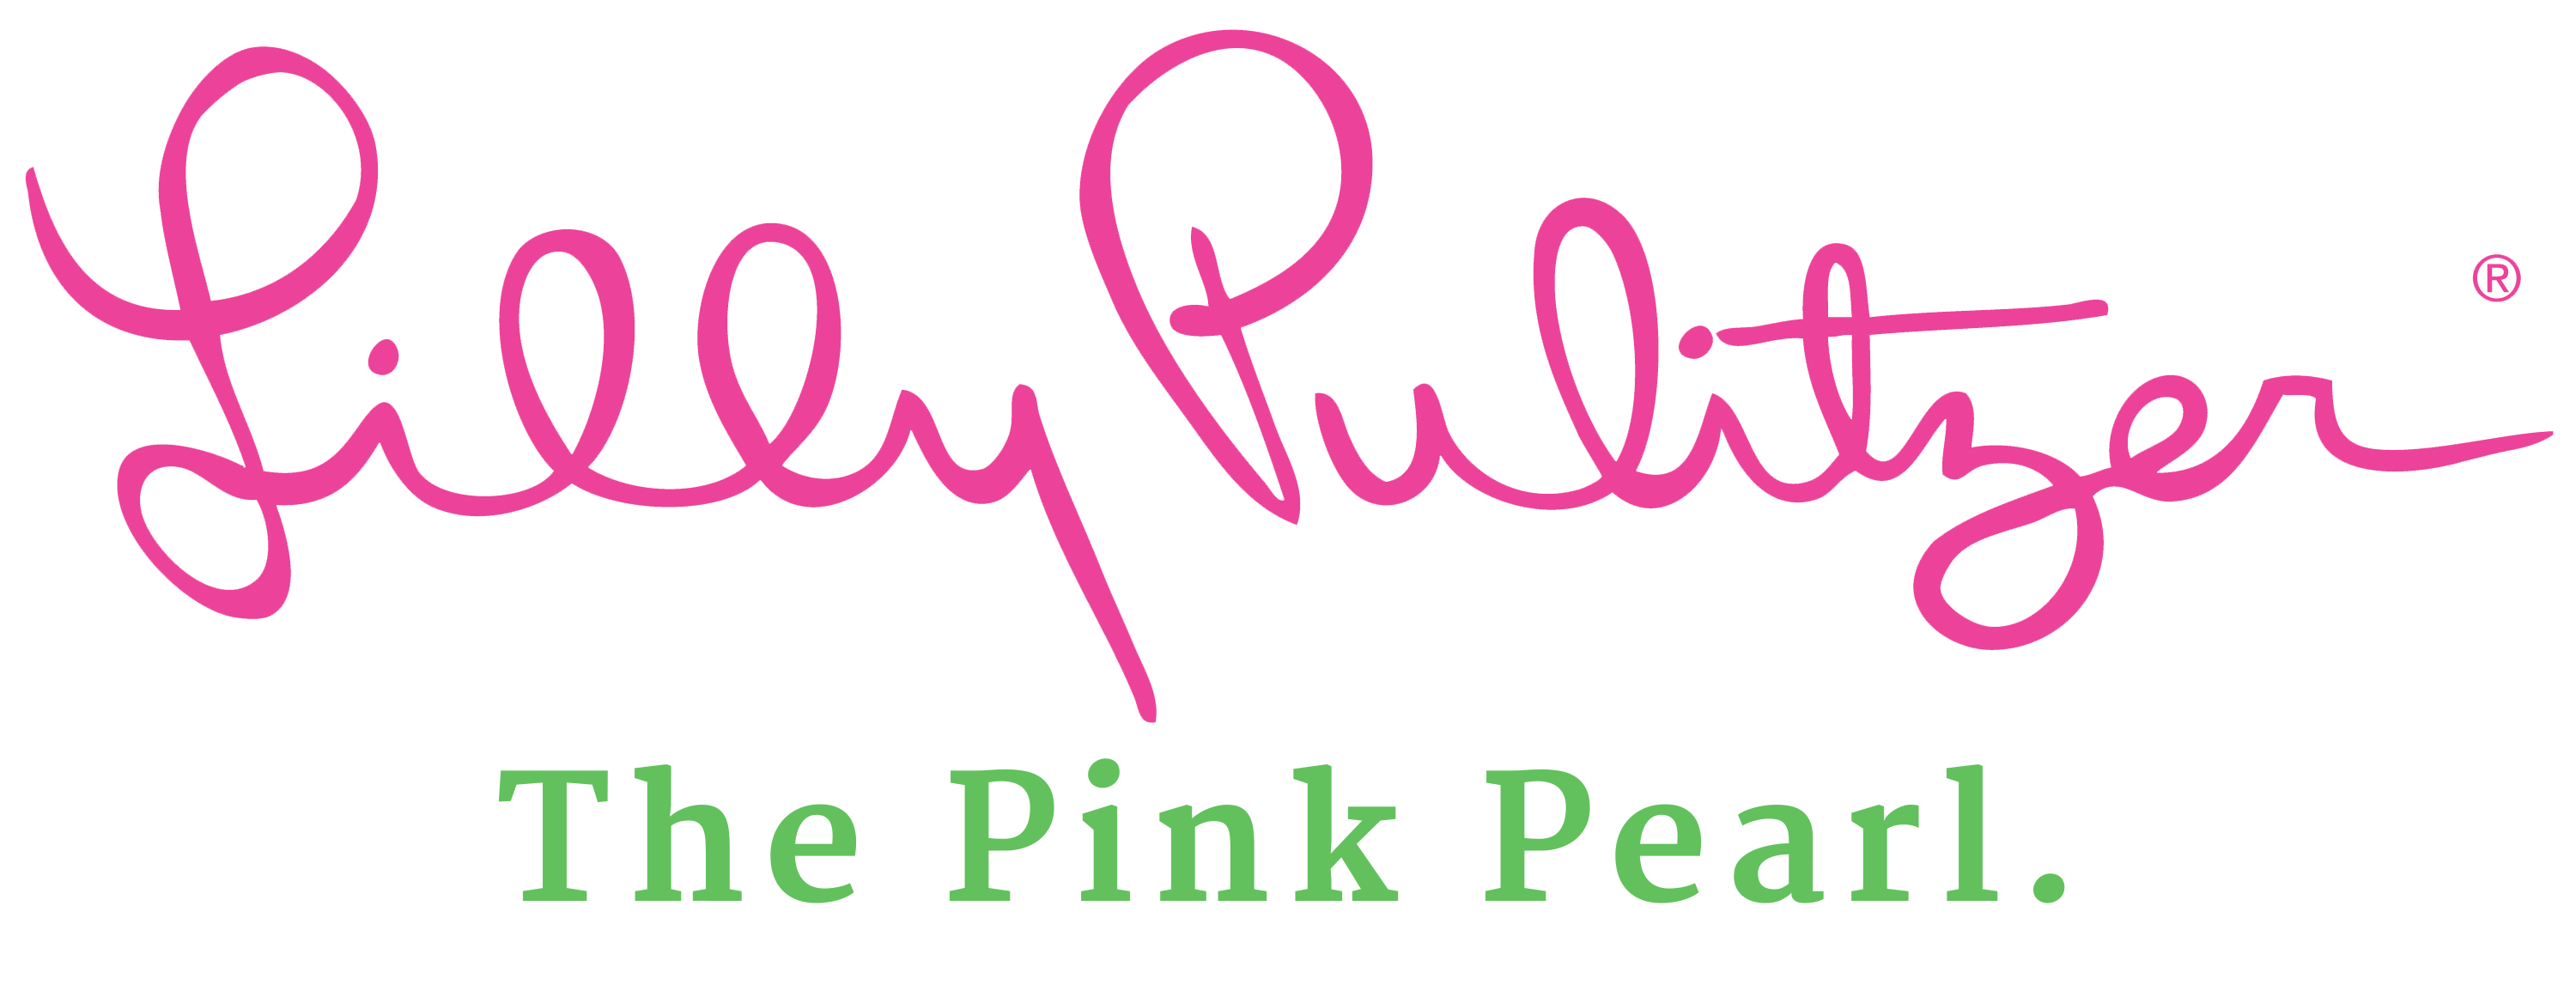 Lilly Pulitzer Logo - Lilly Pulitzer Logo Crossing : Eastgate Crossing